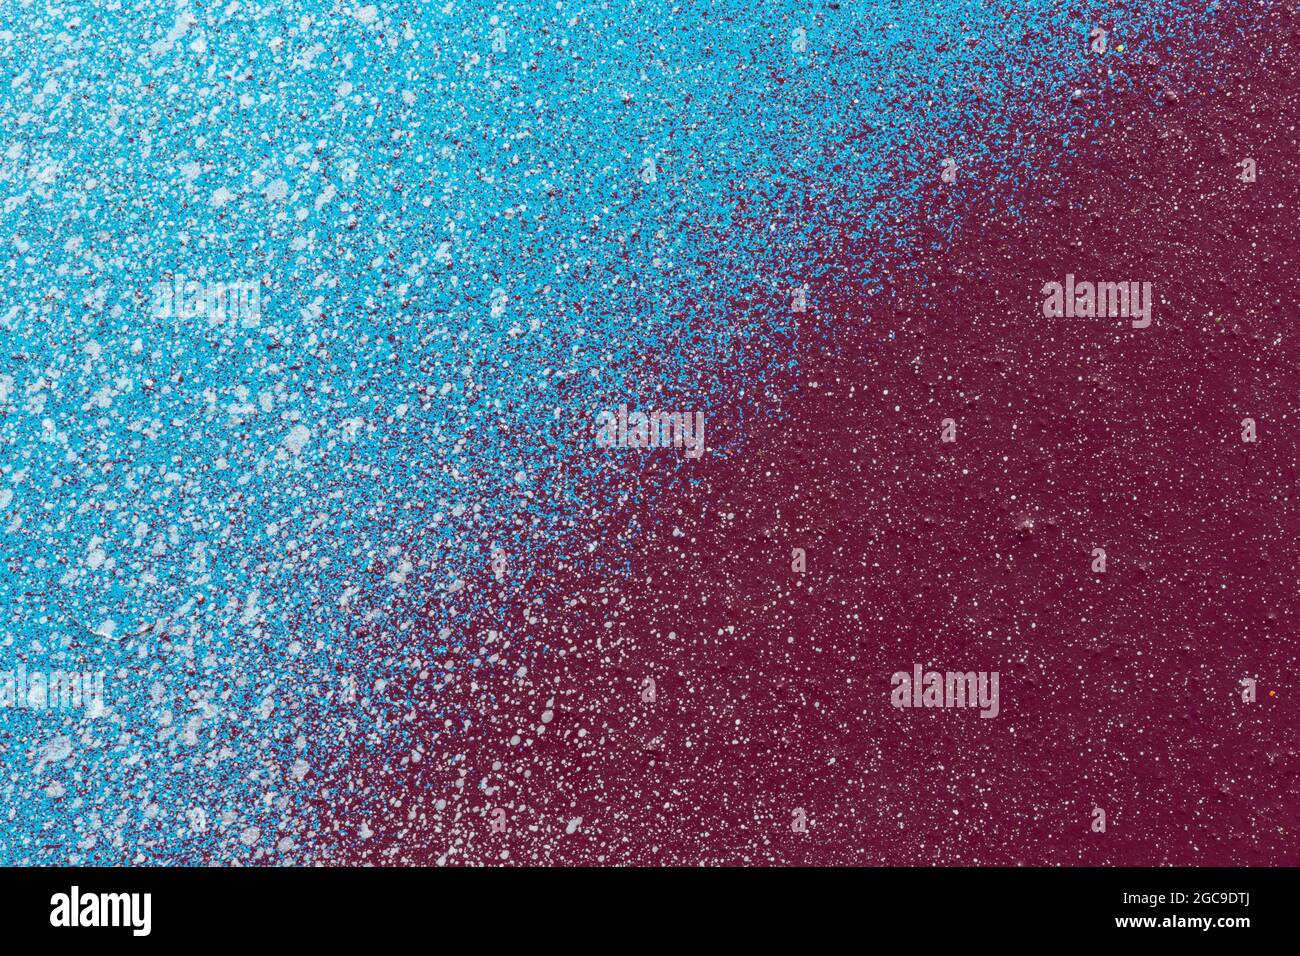 Macro close-up of a light blue and burgundy red spray paint with white splashes. Abstract textured splattered graffiti background with copy space. Stock Photo